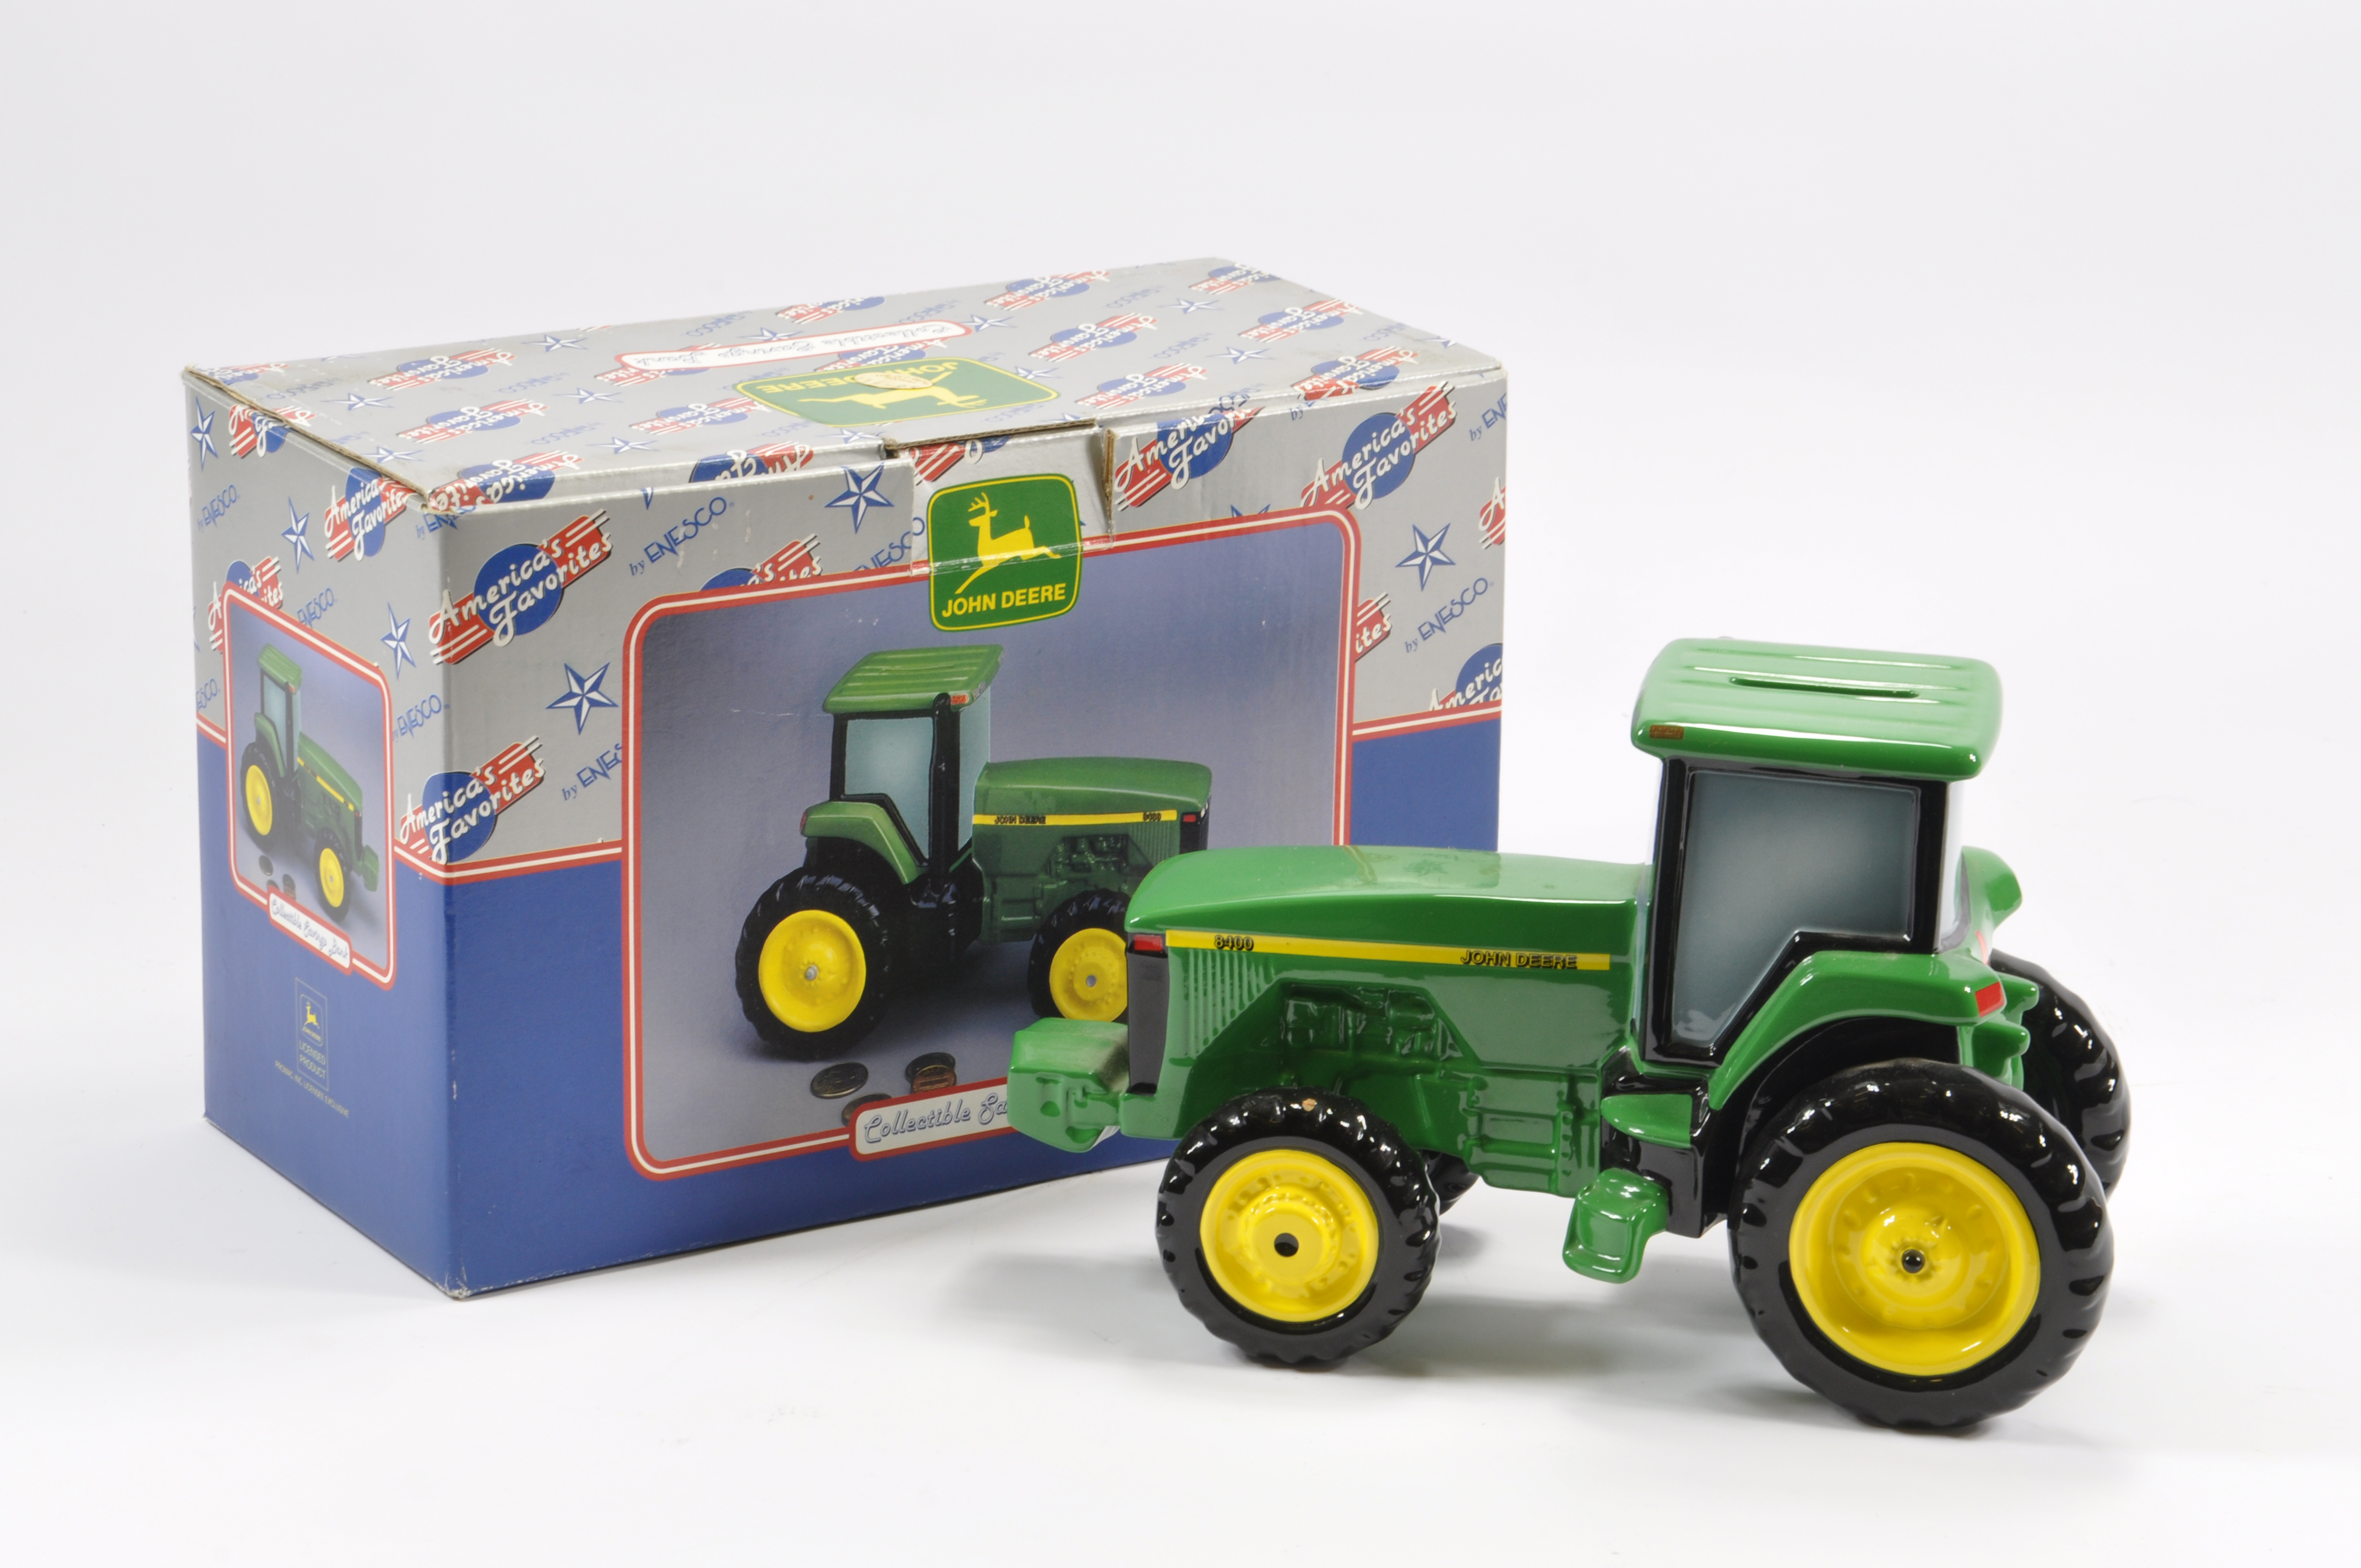 A Collectable John Deere 8400 Large Scale Money Box. Near Mint in Excellent Box.